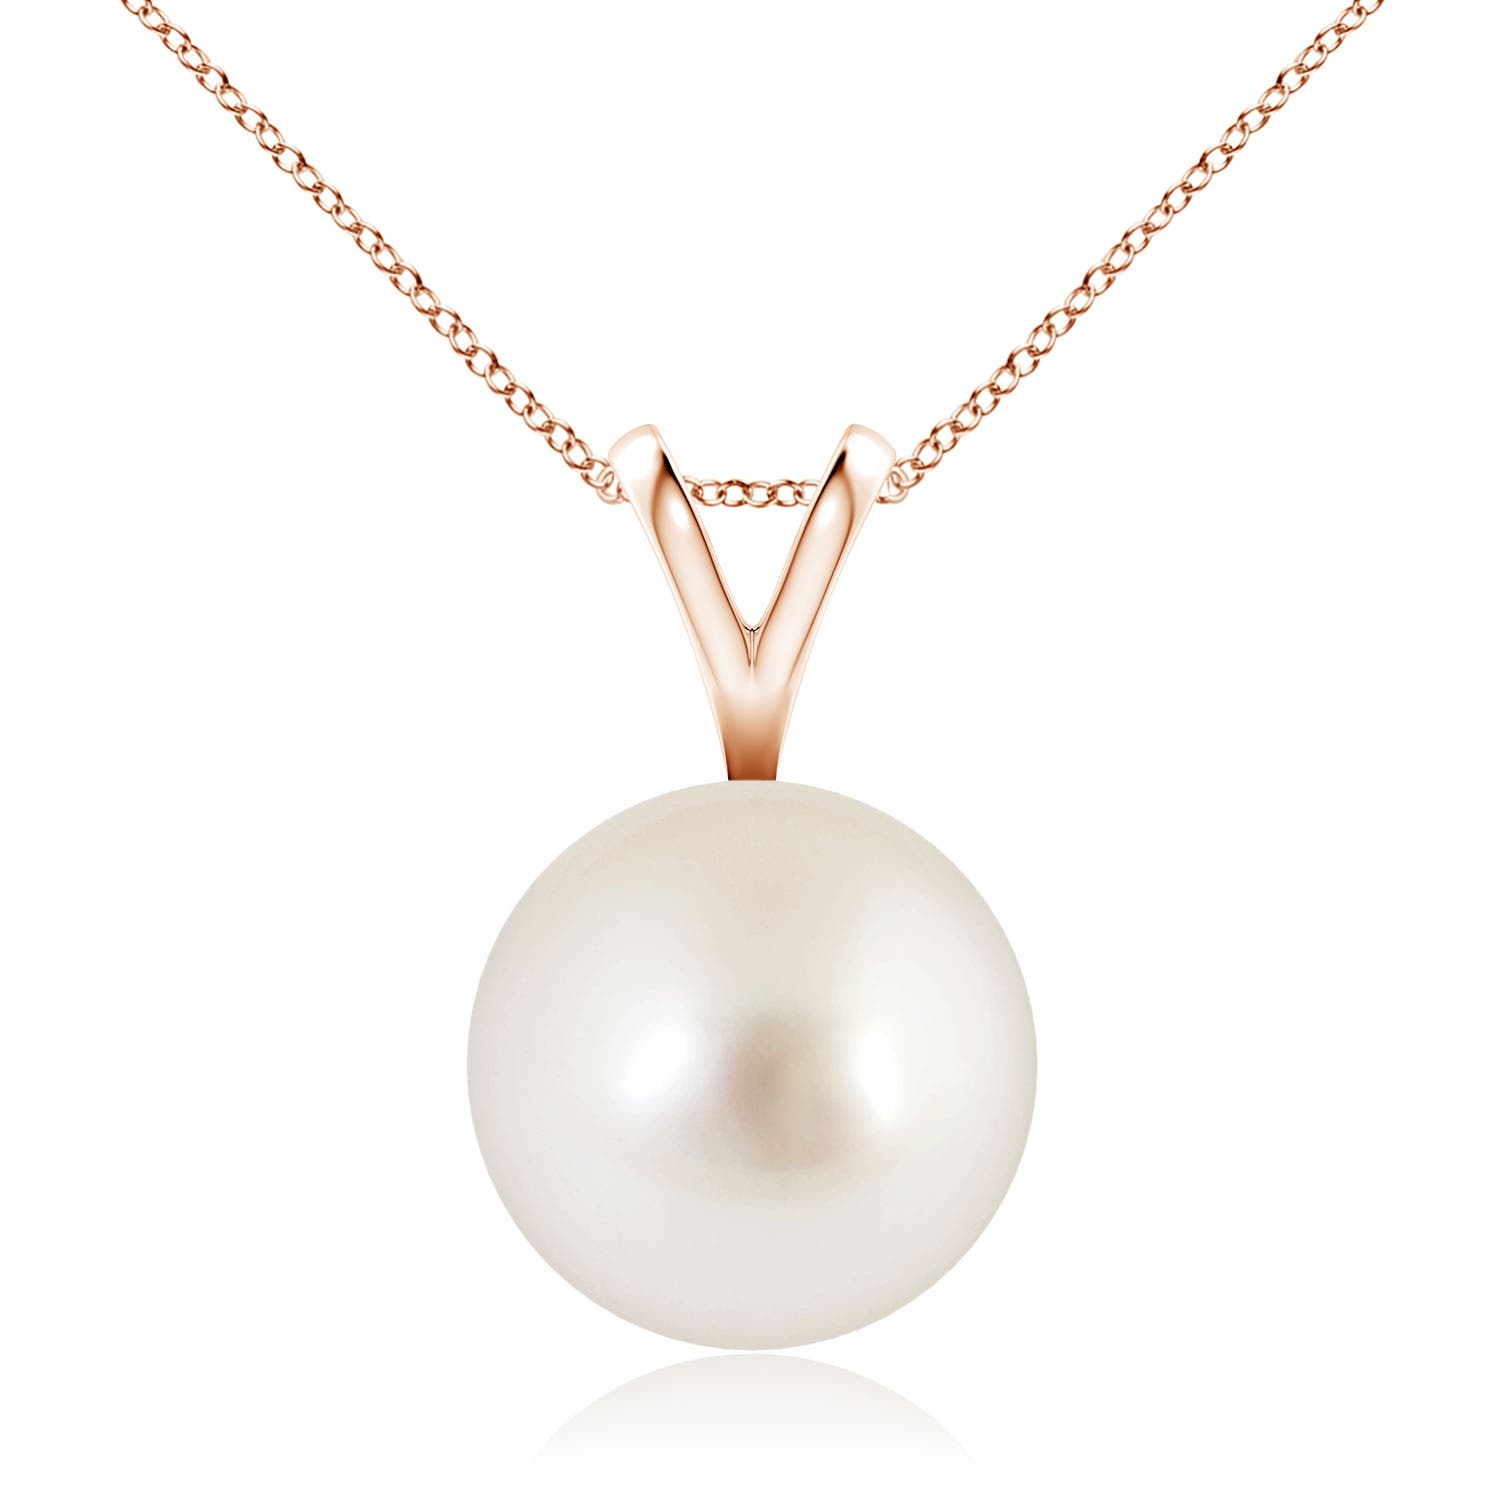 AAAA - South Sea Cultured Pearl / 7.2 CT / 14 KT Rose Gold